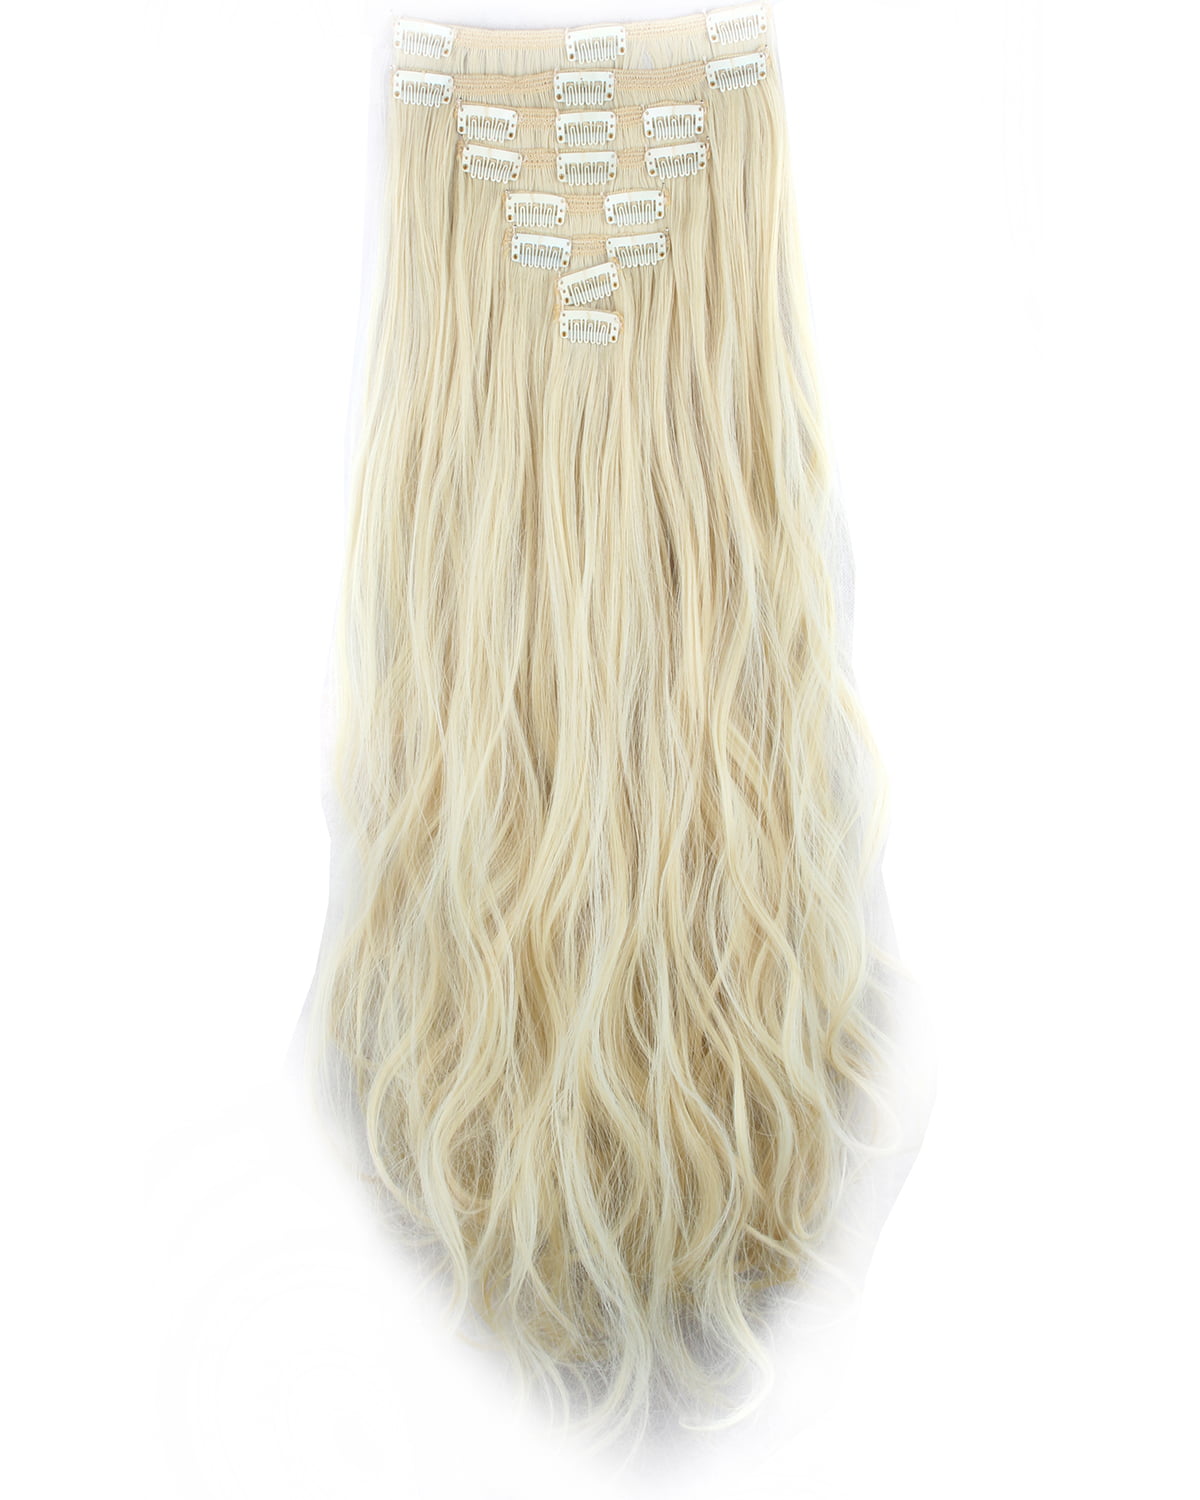 Florata 24 Long Curly Wavy Full Head Clip In Synthetic Hair Extensions